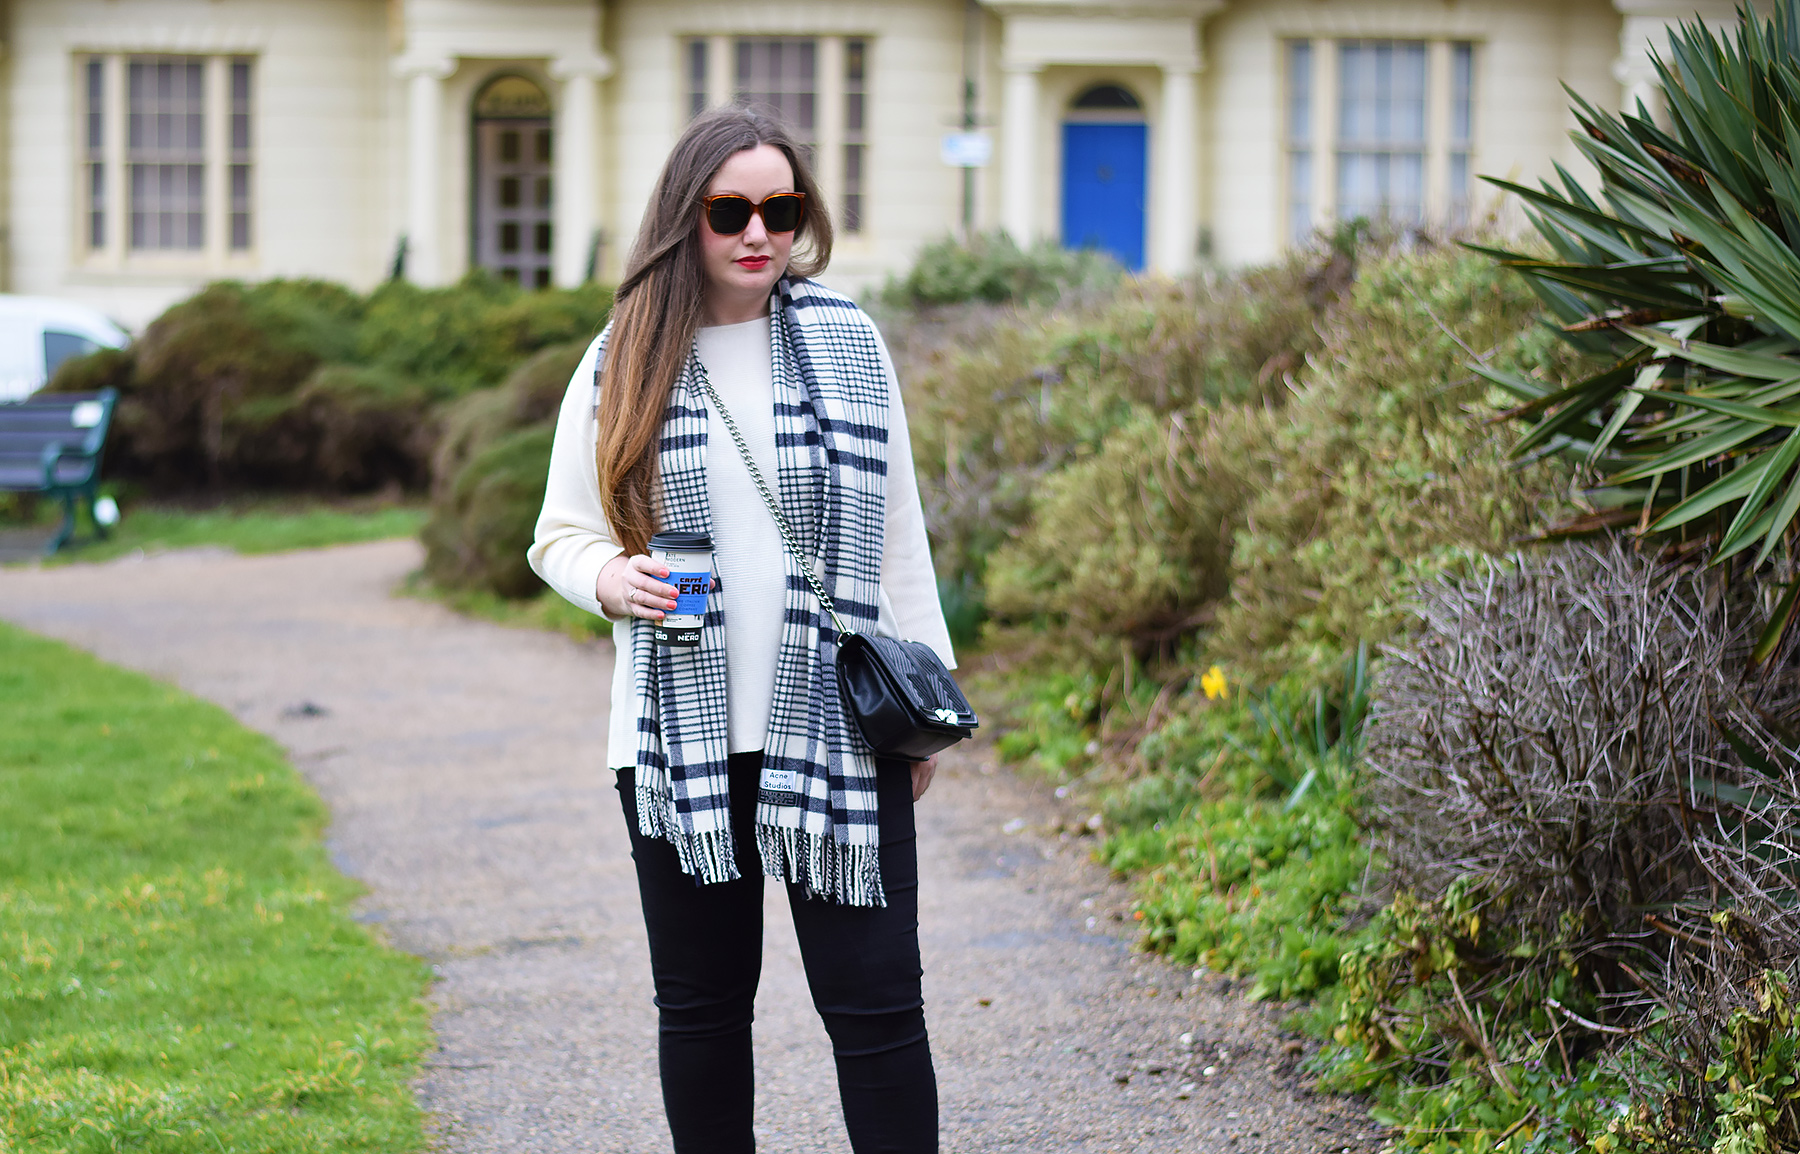 Monochrome layered outfit ideas